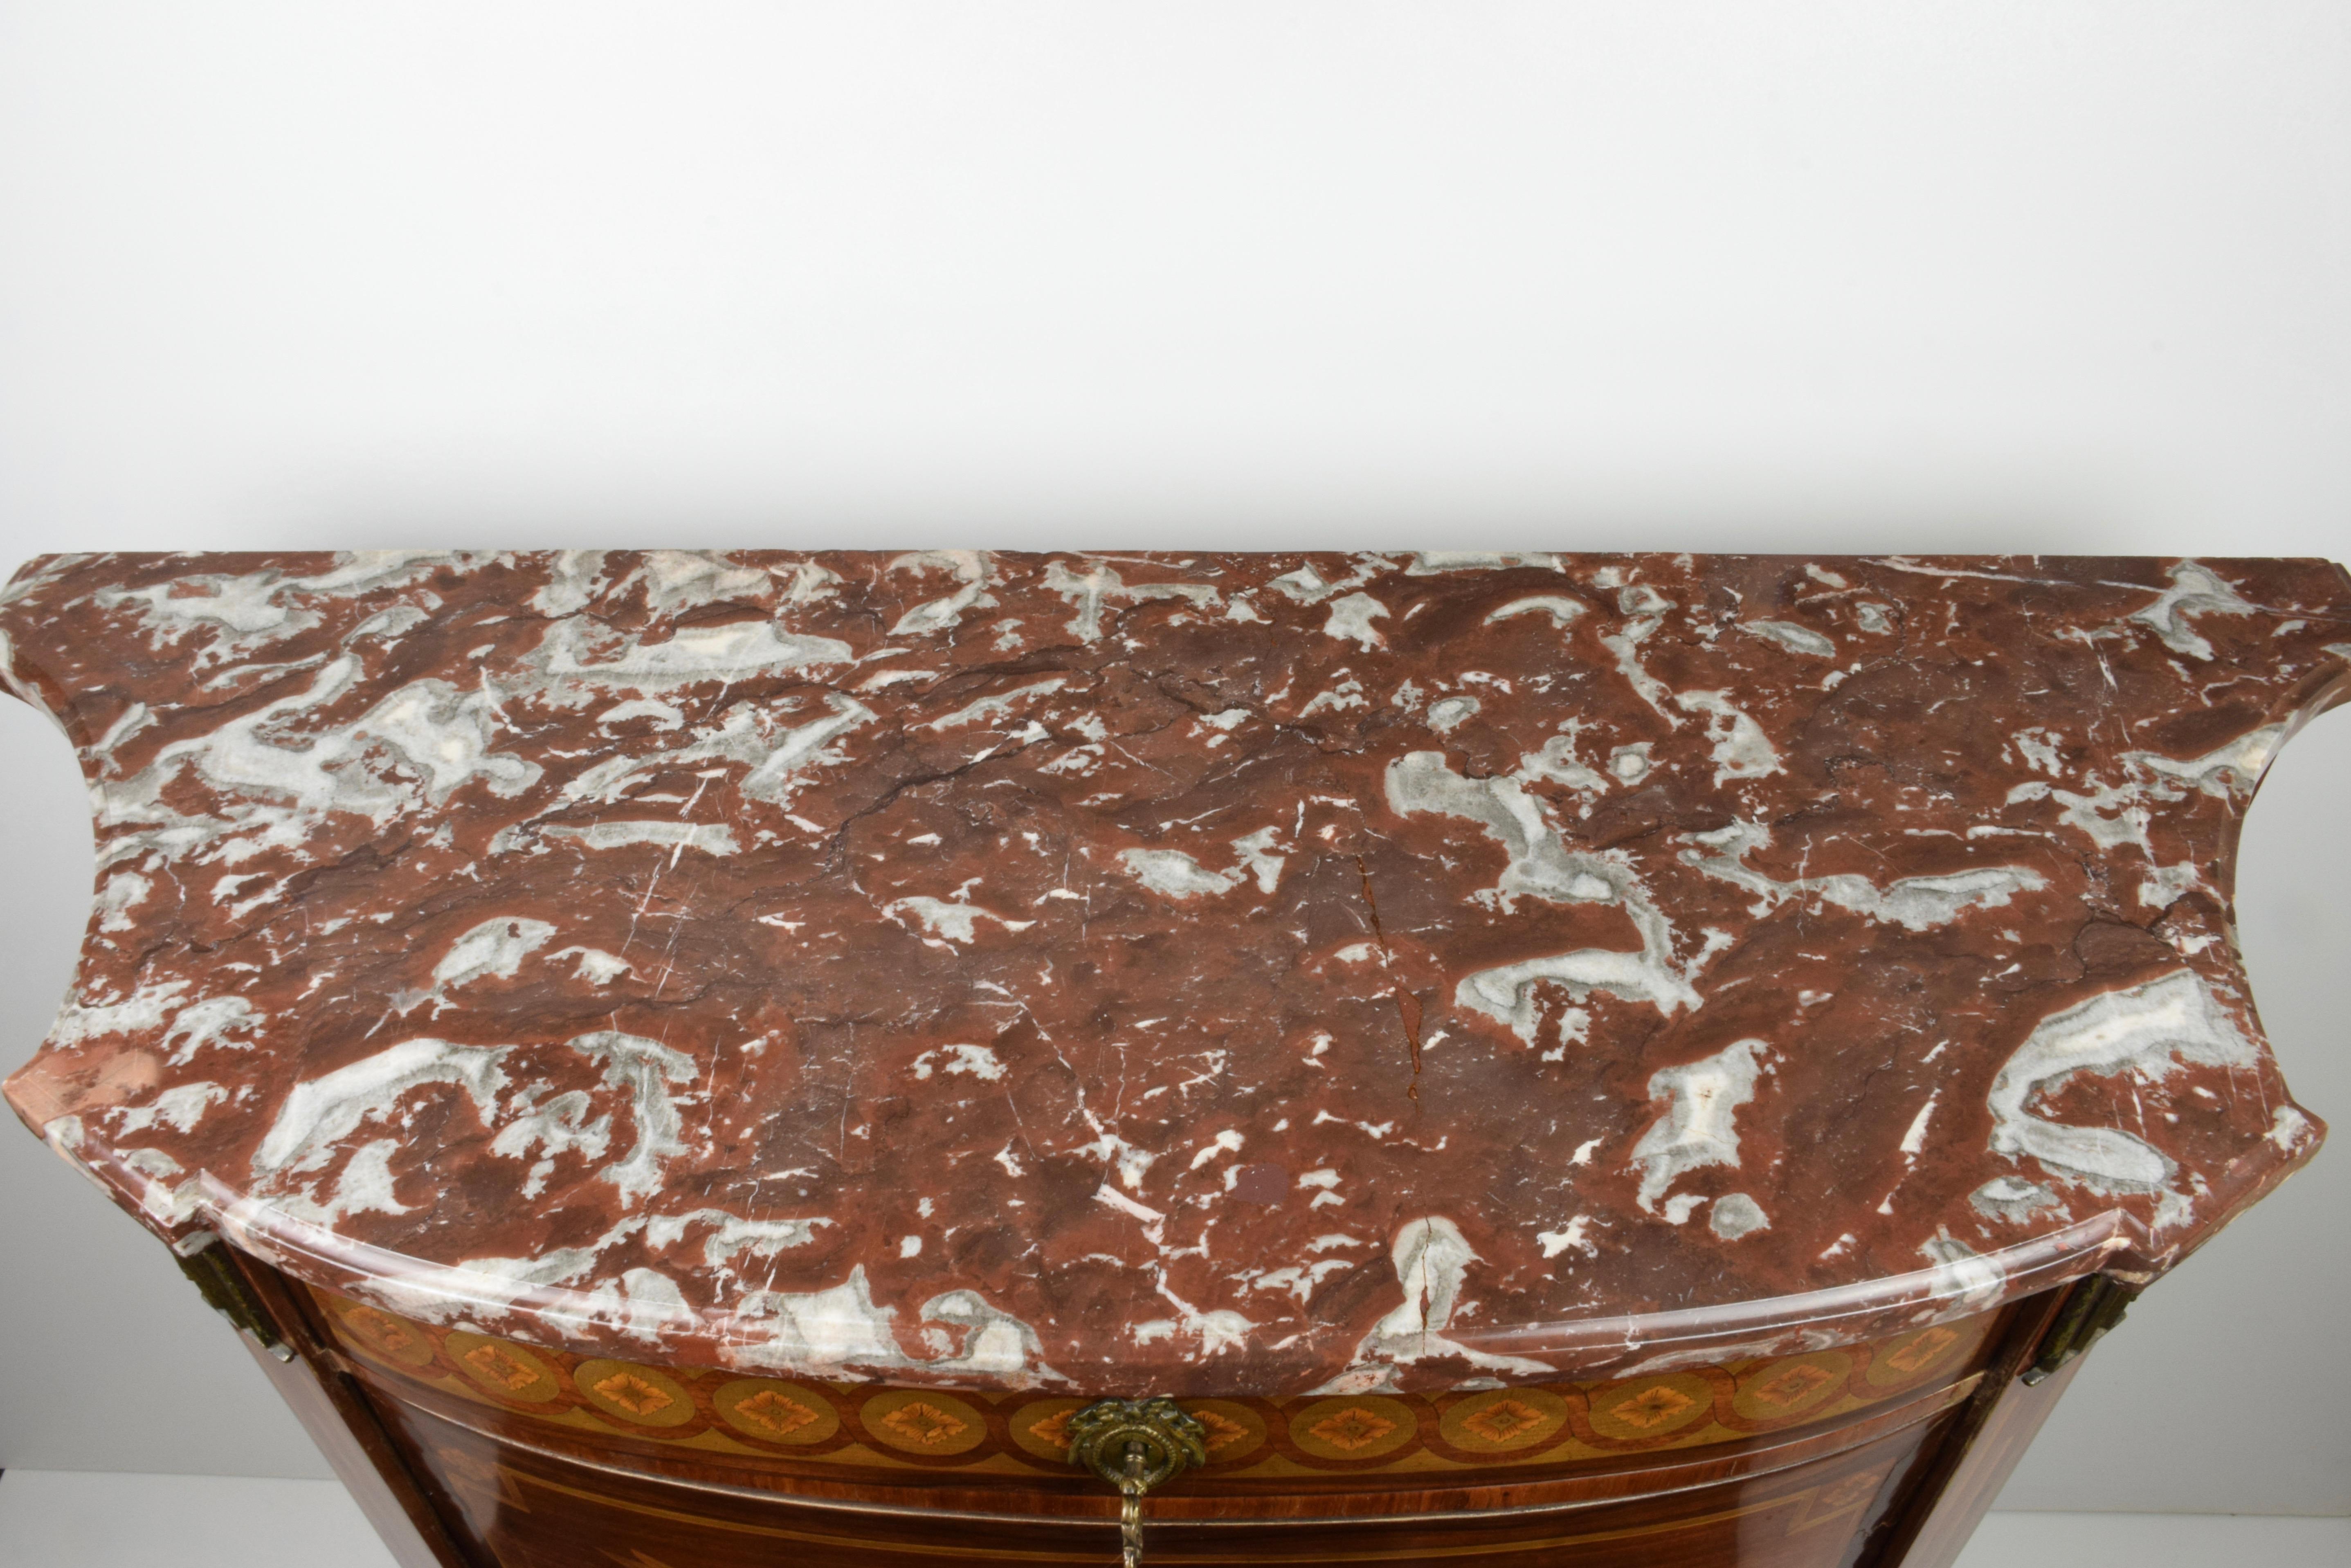 France, second half of the 19th century
Veneered in bois de rose, rosewood, mahogany, maple
Red of France marble top
Dimensions: L 104 x D 39.5 x H 89 cm
Good conditions.